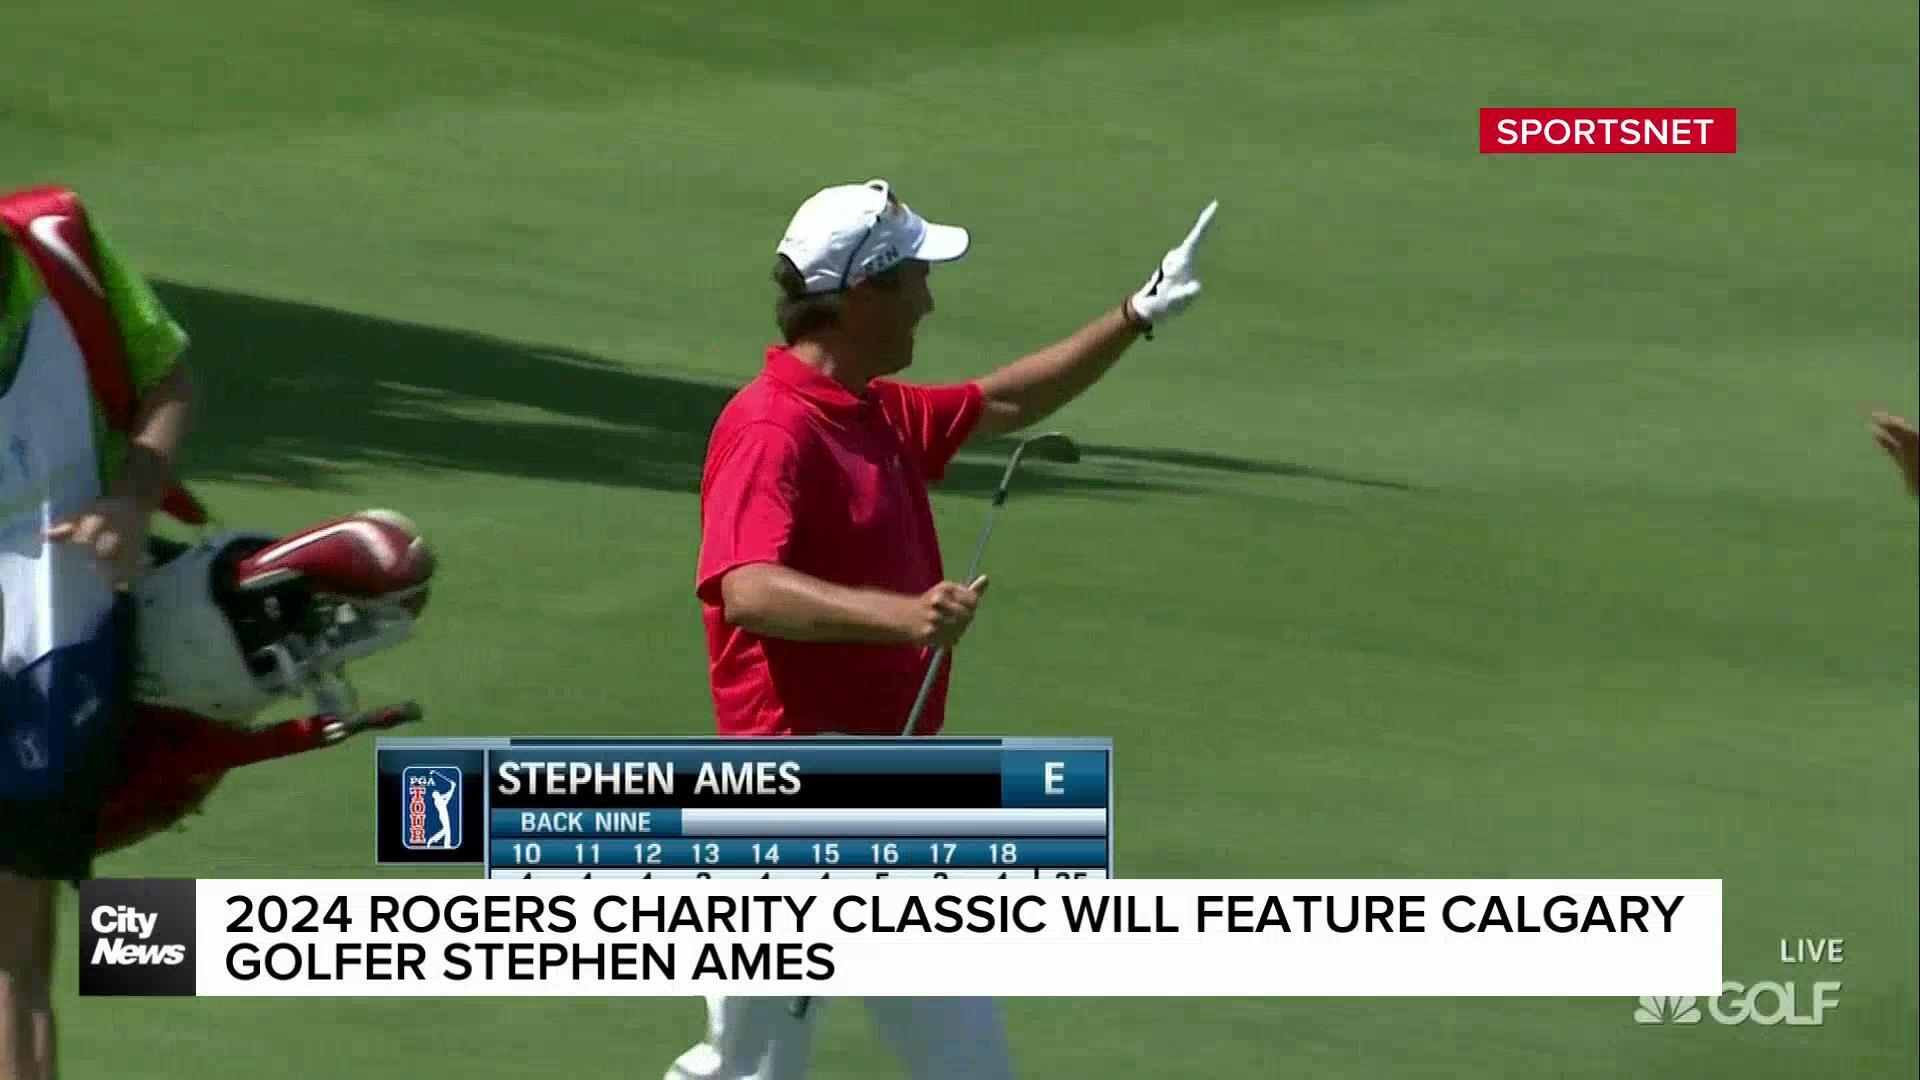 2024 Rogers Charity Classic to feature Calgarian Stephen Ames